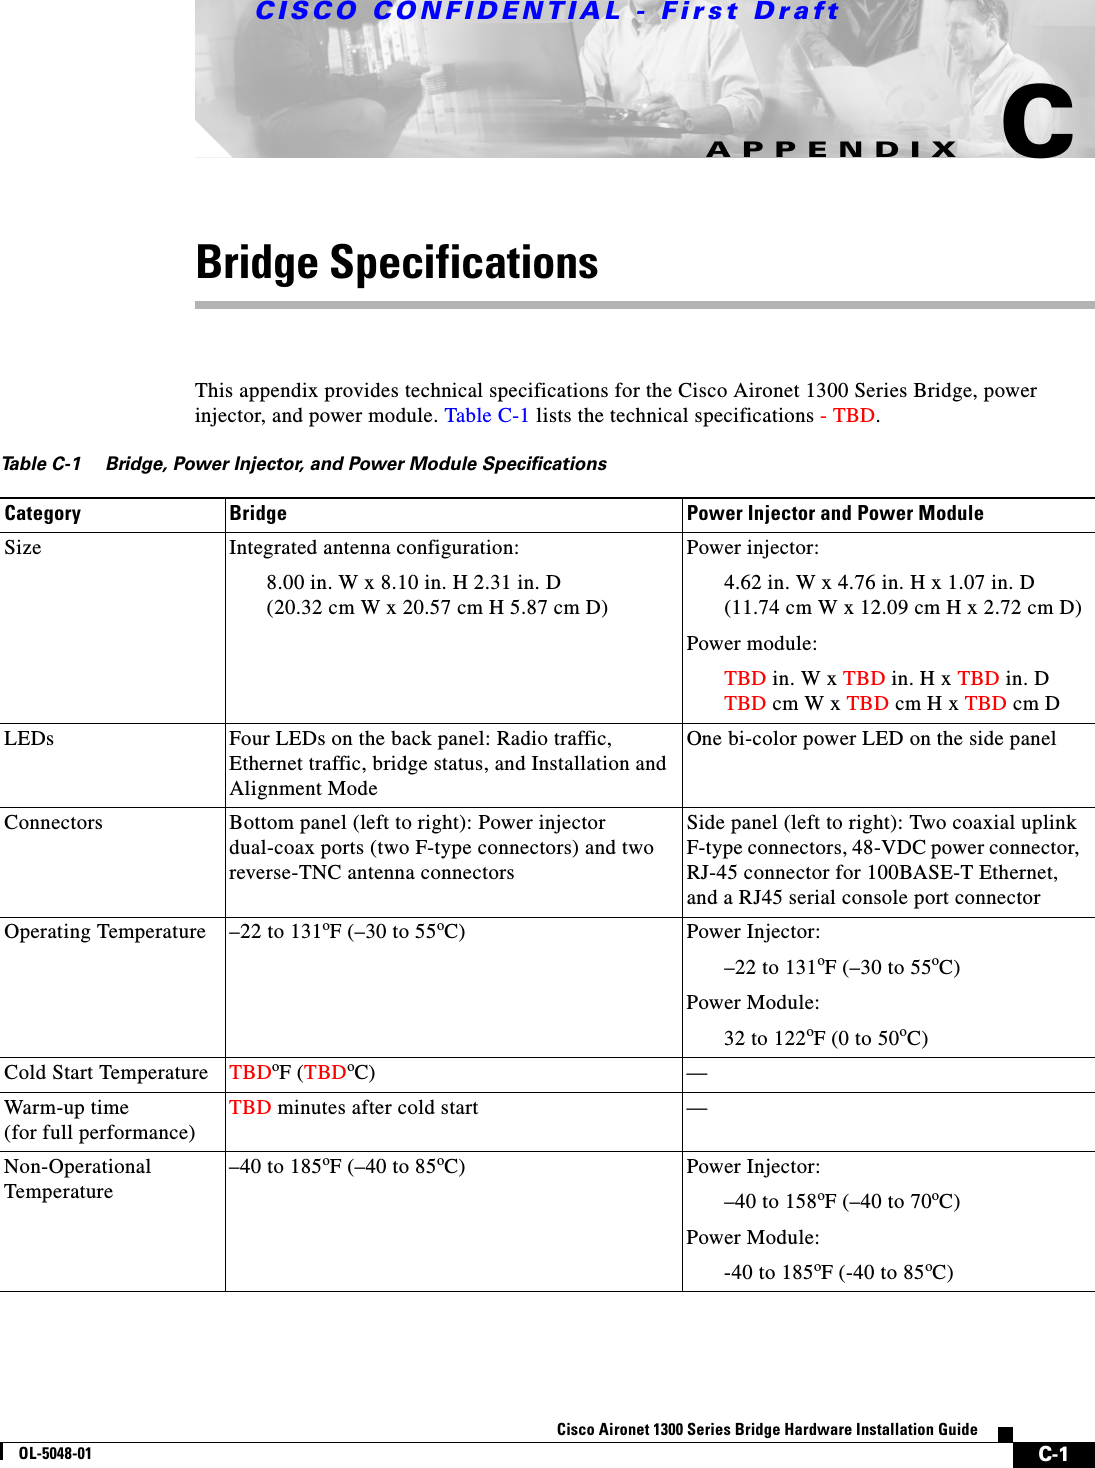 CISCO CONFIDENTIAL - First DraftC-1Cisco Aironet 1300 Series Bridge Hardware Installation GuideOL-5048-01APPENDIXCBridge SpecificationsThis appendix provides technical specifications for the Cisco Aironet 1300 Series Bridge, power injector, and power module. Table C-1 lists the technical specifications - TBD.Table C-1 Bridge, Power Injector, and Power Module SpecificationsCategory Bridge  Power Injector and Power ModuleSize Integrated antenna configuration:8.00 in. W x 8.10 in. H 2.31 in. D (20.32 cm W x 20.57 cm H 5.87 cm D)Power injector:4.62 in. W x 4.76 in. H x 1.07 in. D(11.74 cm W x 12.09 cm H x 2.72 cm D)Power module:TBD in. W x TBD in. H x TBD in. DTBD cm W x TBD cm H x TBD cm DLEDs Four LEDs on the back panel: Radio traffic, Ethernet traffic, bridge status, and Installation and Alignment ModeOne bi-color power LED on the side panelConnectors Bottom panel (left to right): Power injector dual-coax ports (two F-type connectors) and two reverse-TNC antenna connectors Side panel (left to right): Two coaxial uplink F-type connectors, 48-VDC power connector, RJ-45 connector for 100BASE-T Ethernet, and a RJ45 serial console port connectorOperating Temperature –22 to 131oF (–30 to 55oC) Power Injector:–22 to 131oF (–30 to 55oC) Power Module:32 to 122oF (0 to 50oC)Cold Start Temperature TBDoF (TBDoC) —Warm-up time(for full performance)TBD minutes after cold start —Non-Operational Temperature–40 to 185oF (–40 to 85oC) Power Injector:–40 to 158oF (–40 to 70oC) Power Module:-40 to 185oF (-40 to 85oC)